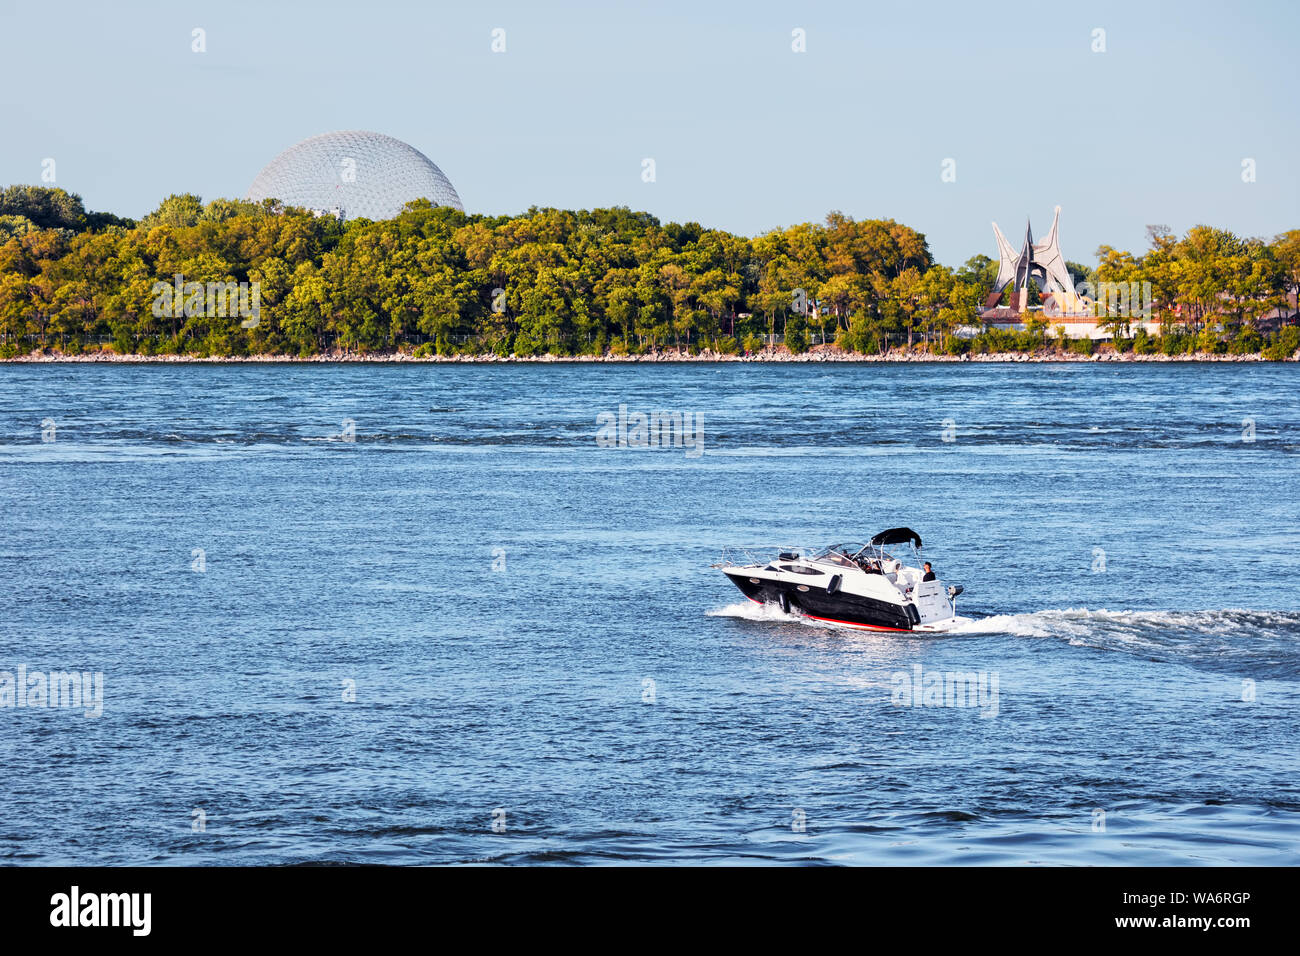 Motorboat sailing over the saint lawrence river with Saint Helen's island and biosphere in the background  in Montreal, Canada Stock Photo